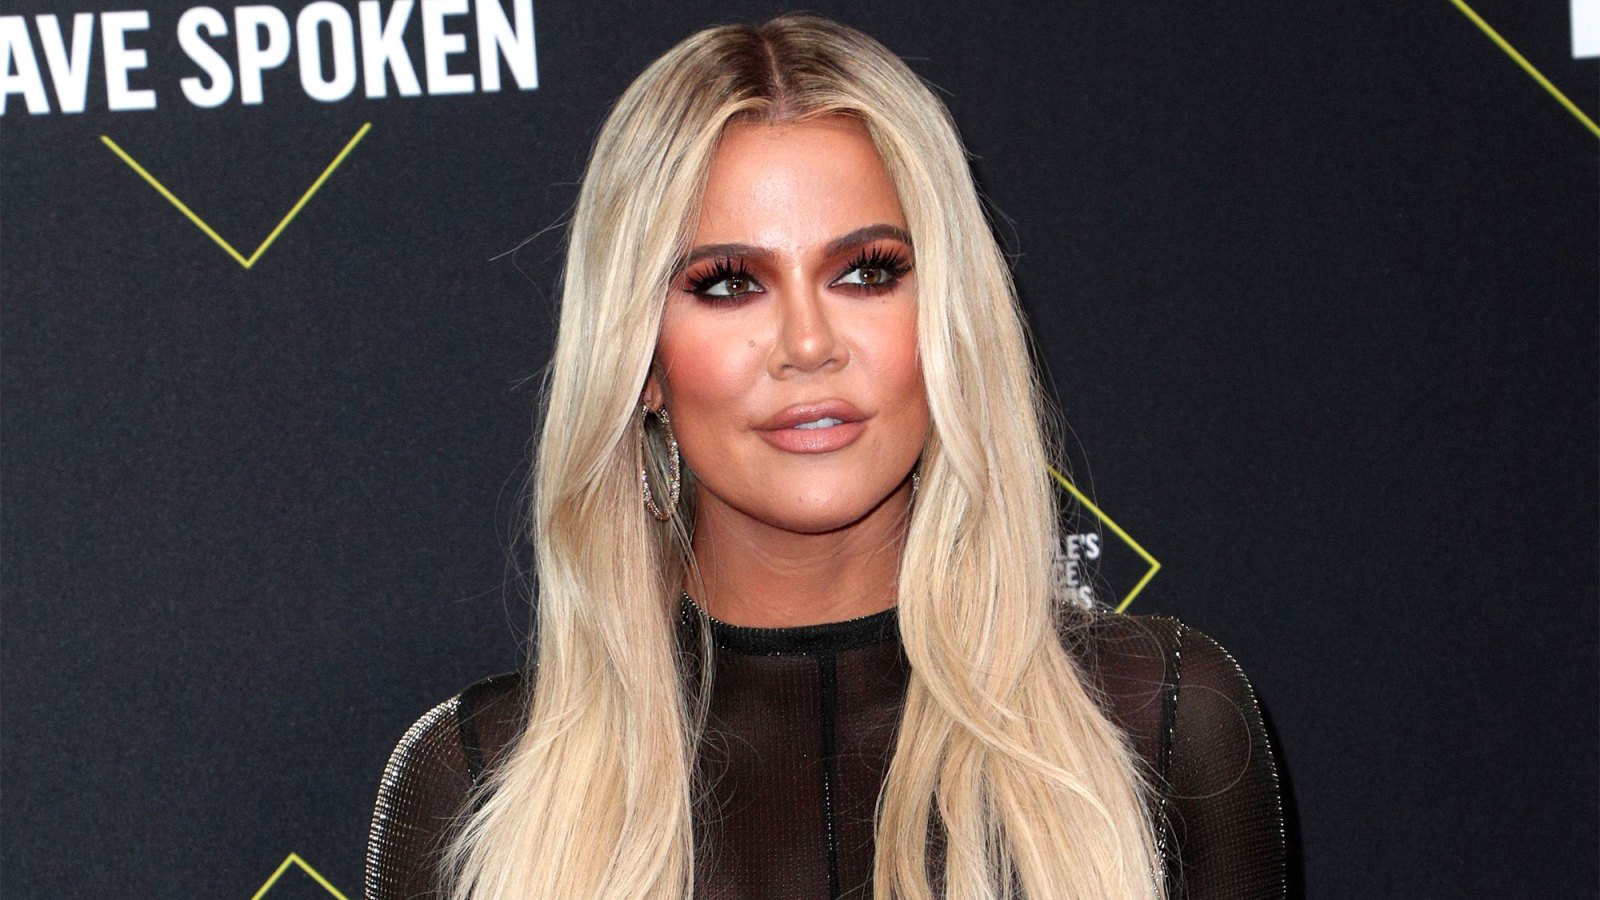 Snakes Ahead? Khloe Kardashian Issues Cryptic Warning About ‘Shady Bitches’